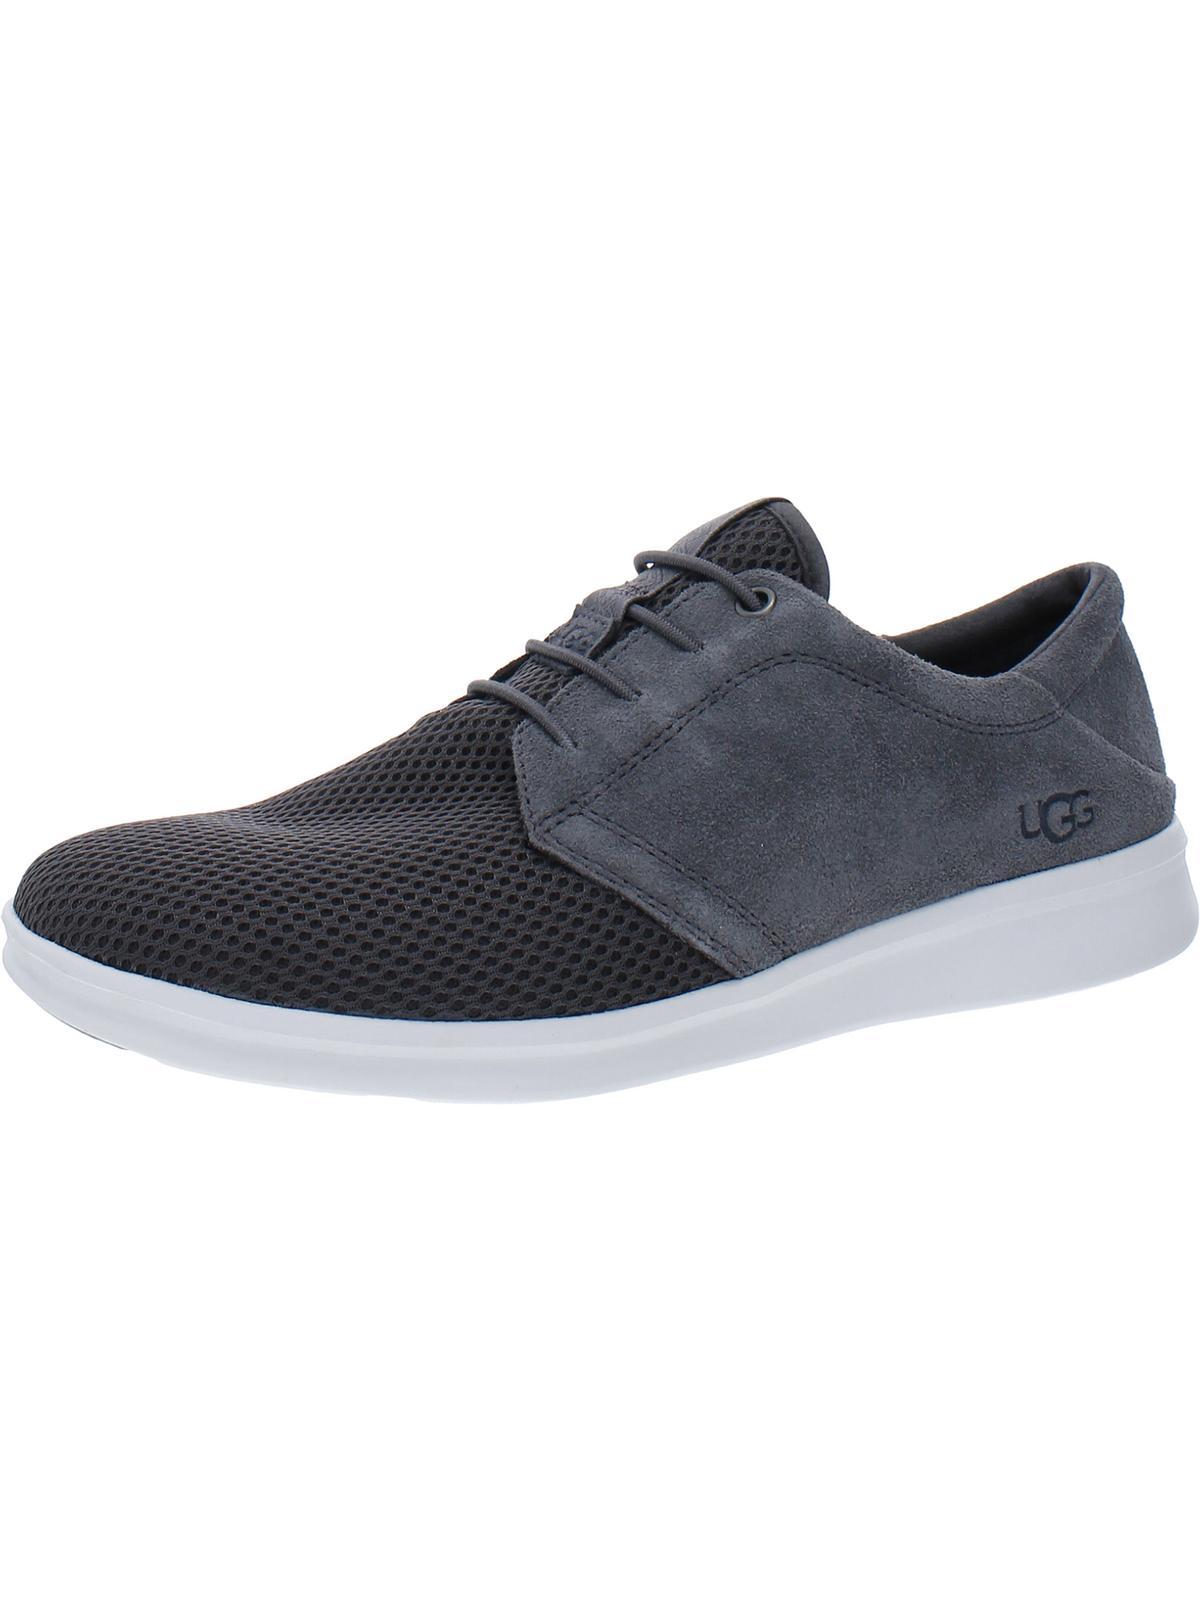 UGG Greyson Suede Mesh Casual And Fashion Sneakers in Blue for Men | Lyst